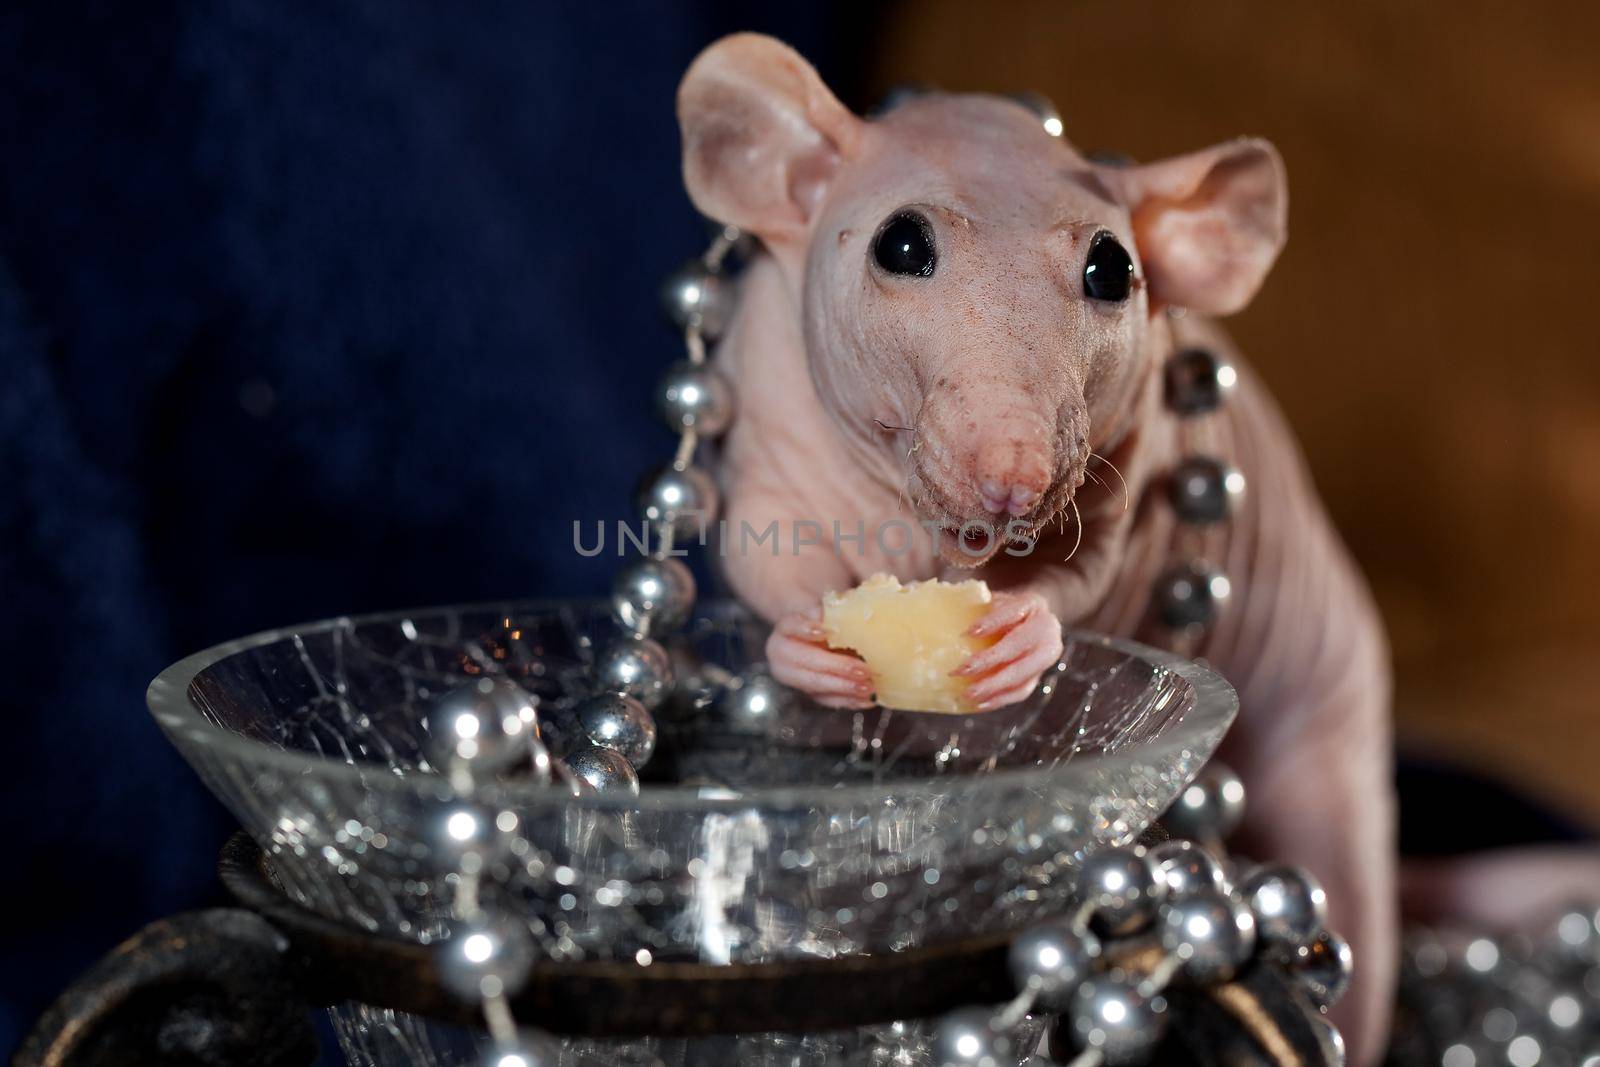 Hairless rat jewelry and cheese by Lincikas